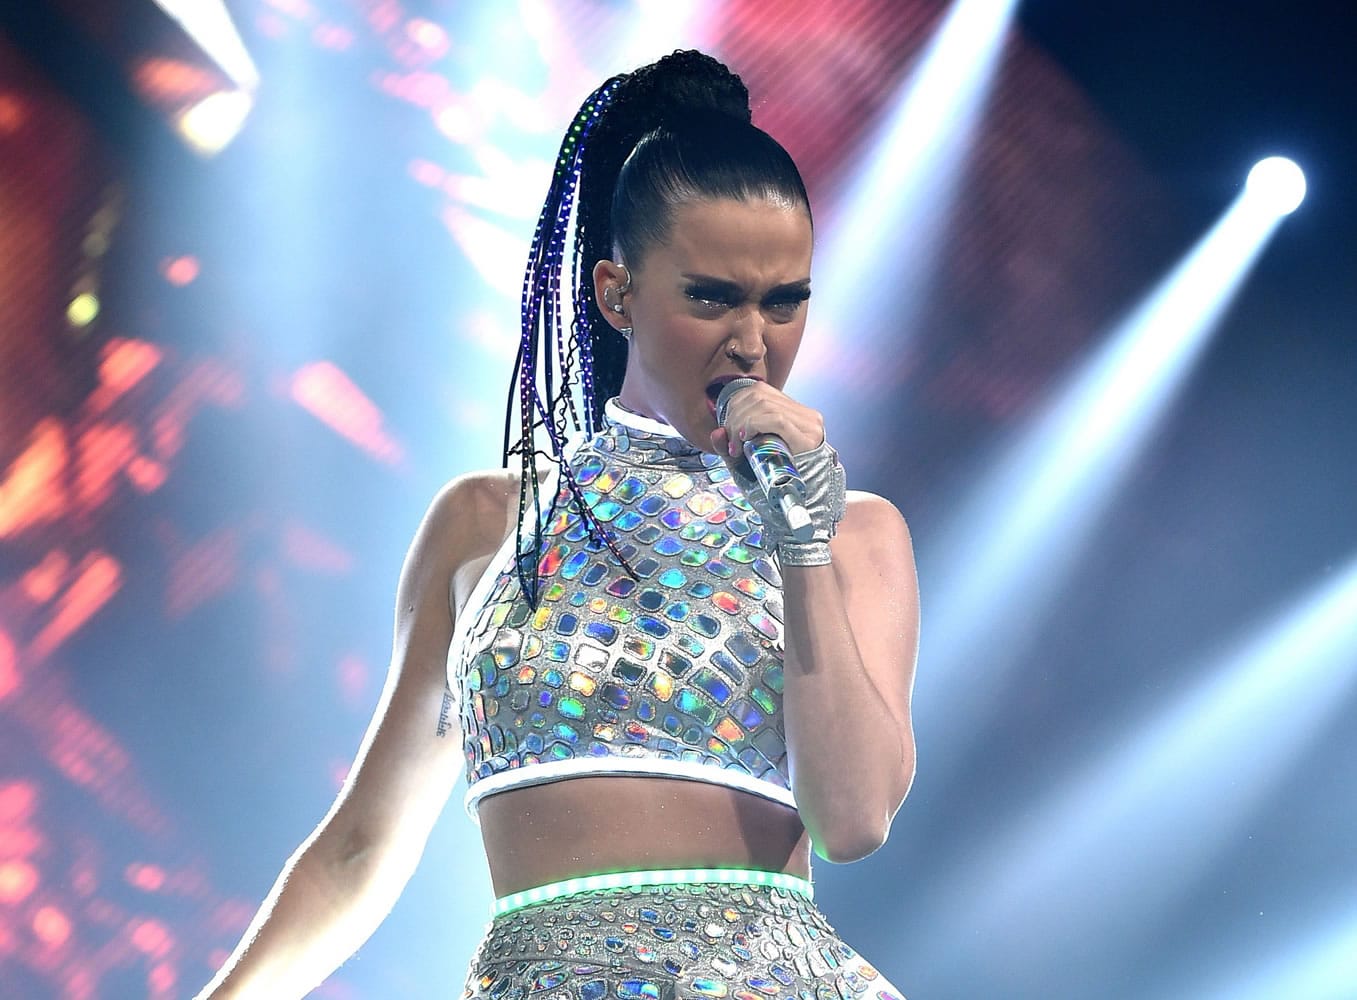 Invision files
Katy Perry is nominated for Grammy Awards in the pop duo/group performance category for &quot;Dark Horse&quot; and in the pop vocal album category for &quot;Prism.&quot;